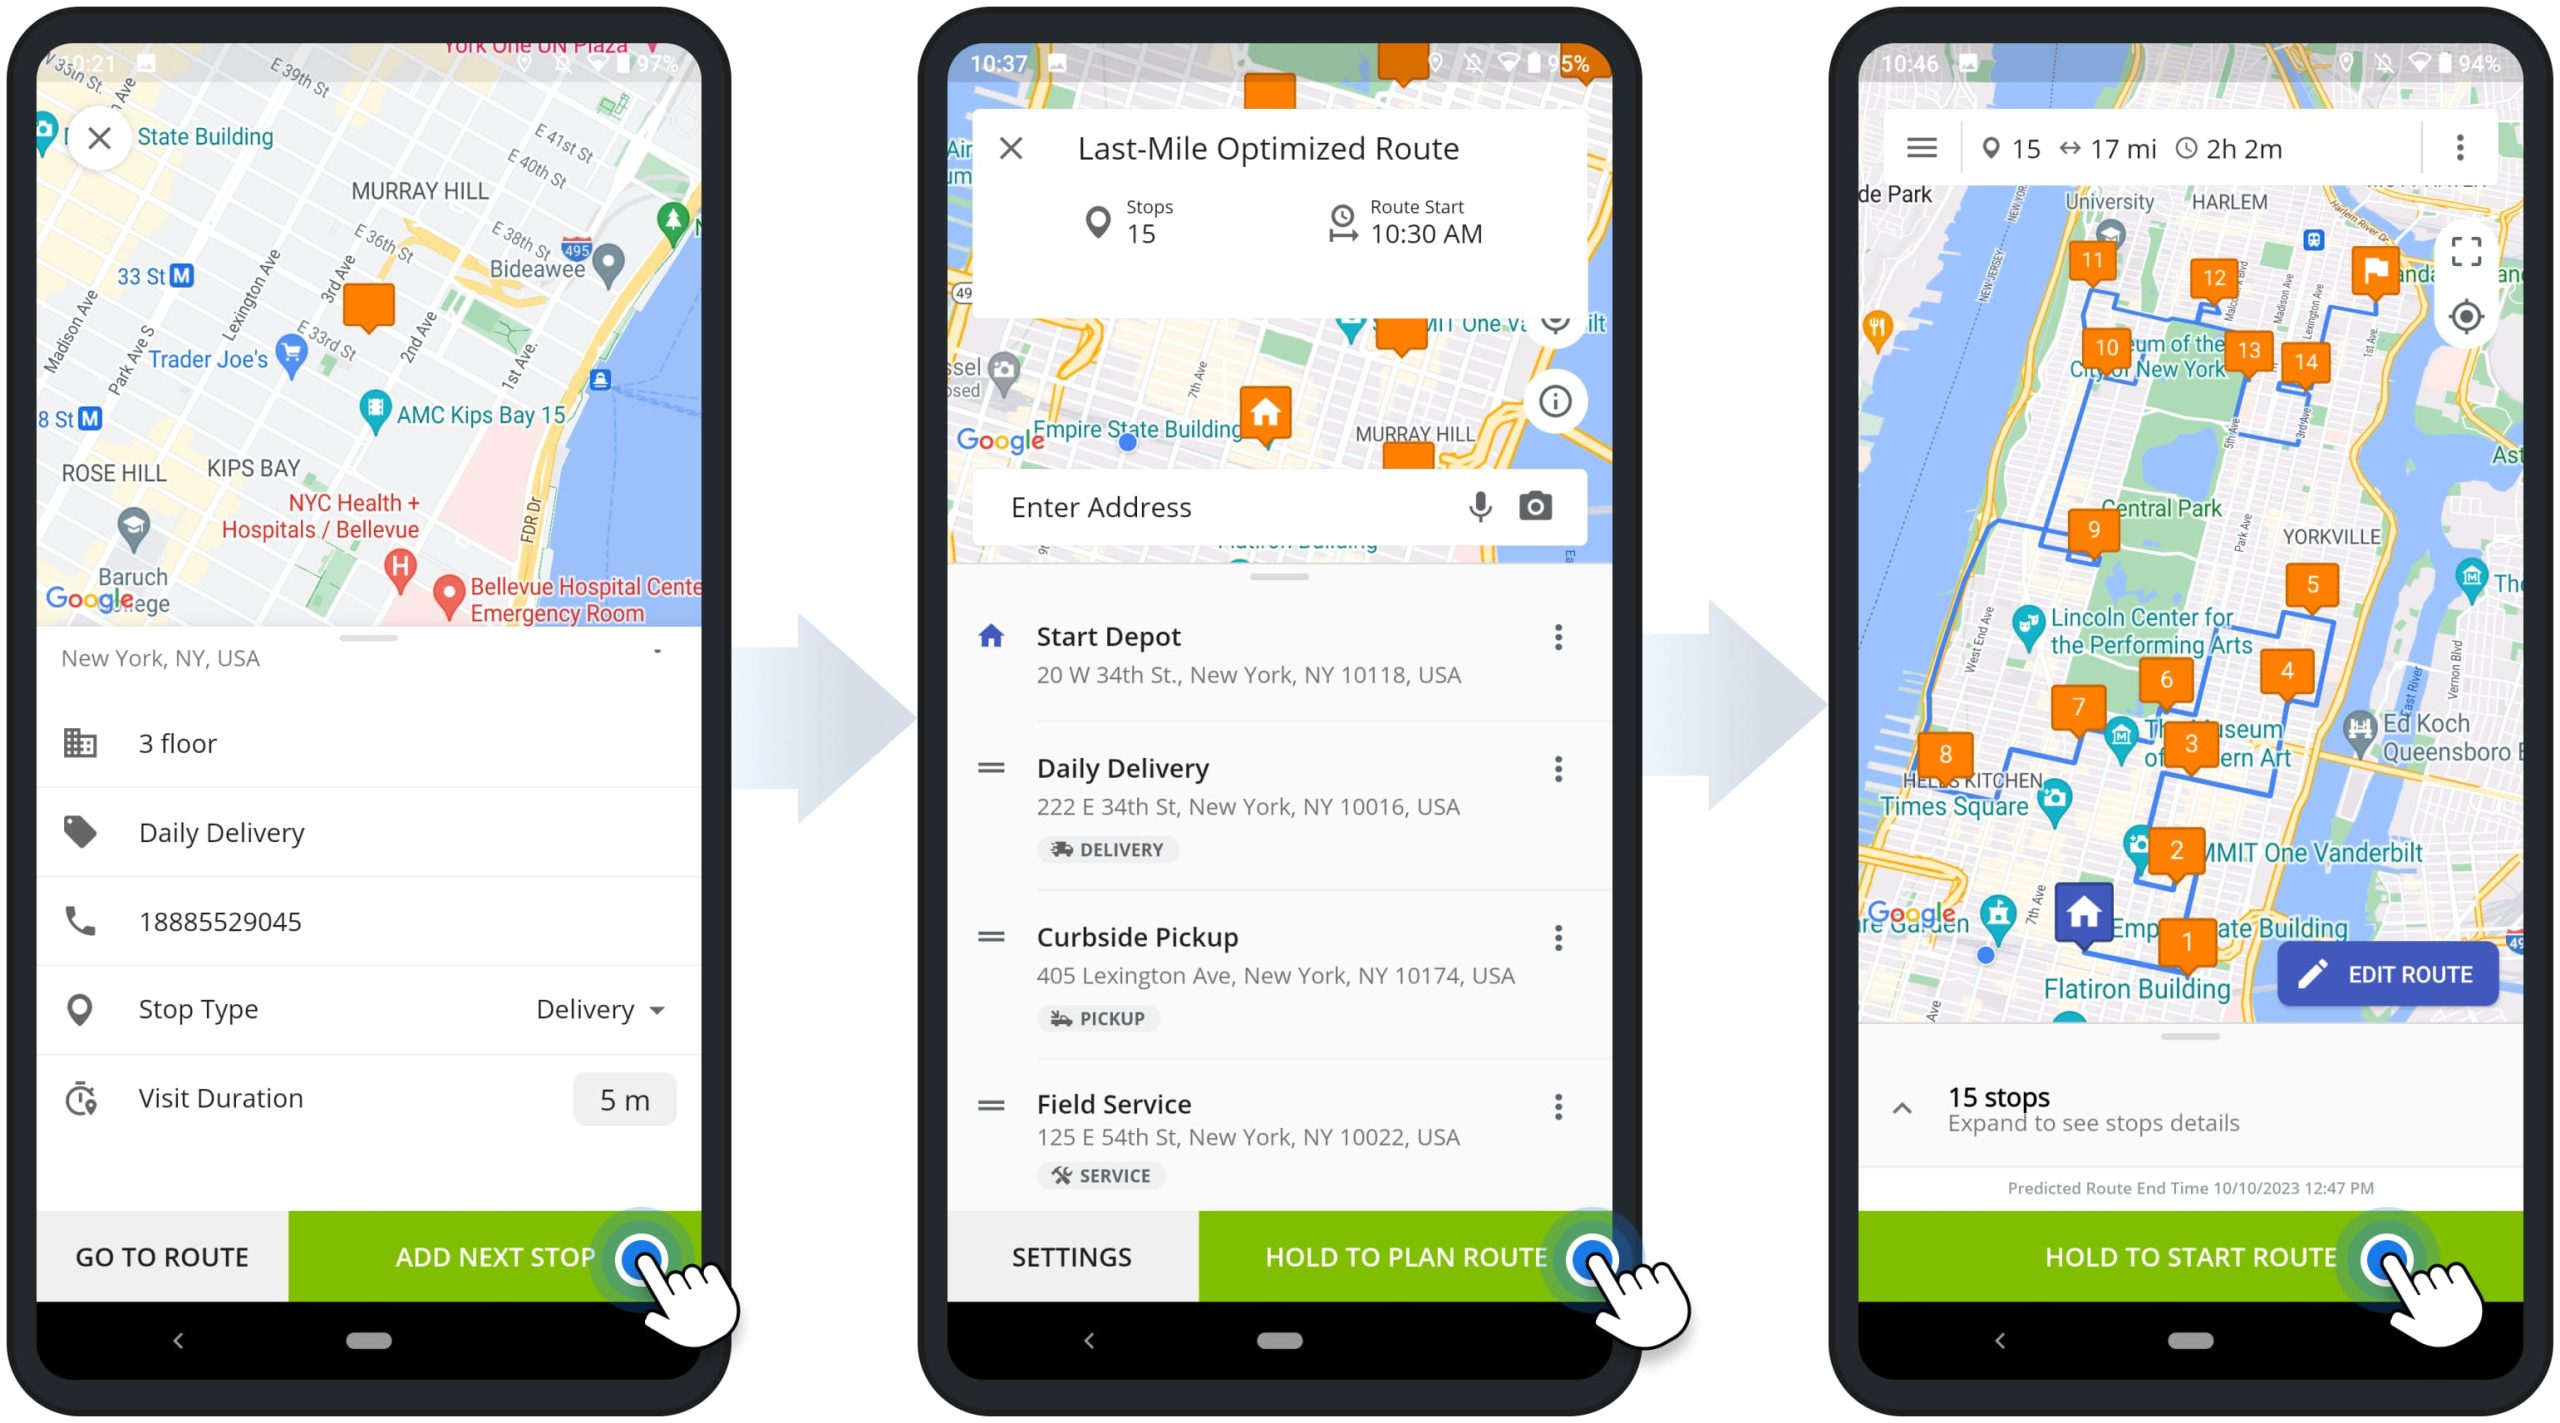 Plan and sequence multi-address routes using Route4Me's Android Route Planner app for last-mile delivery drivers, field service, field sales, etc.